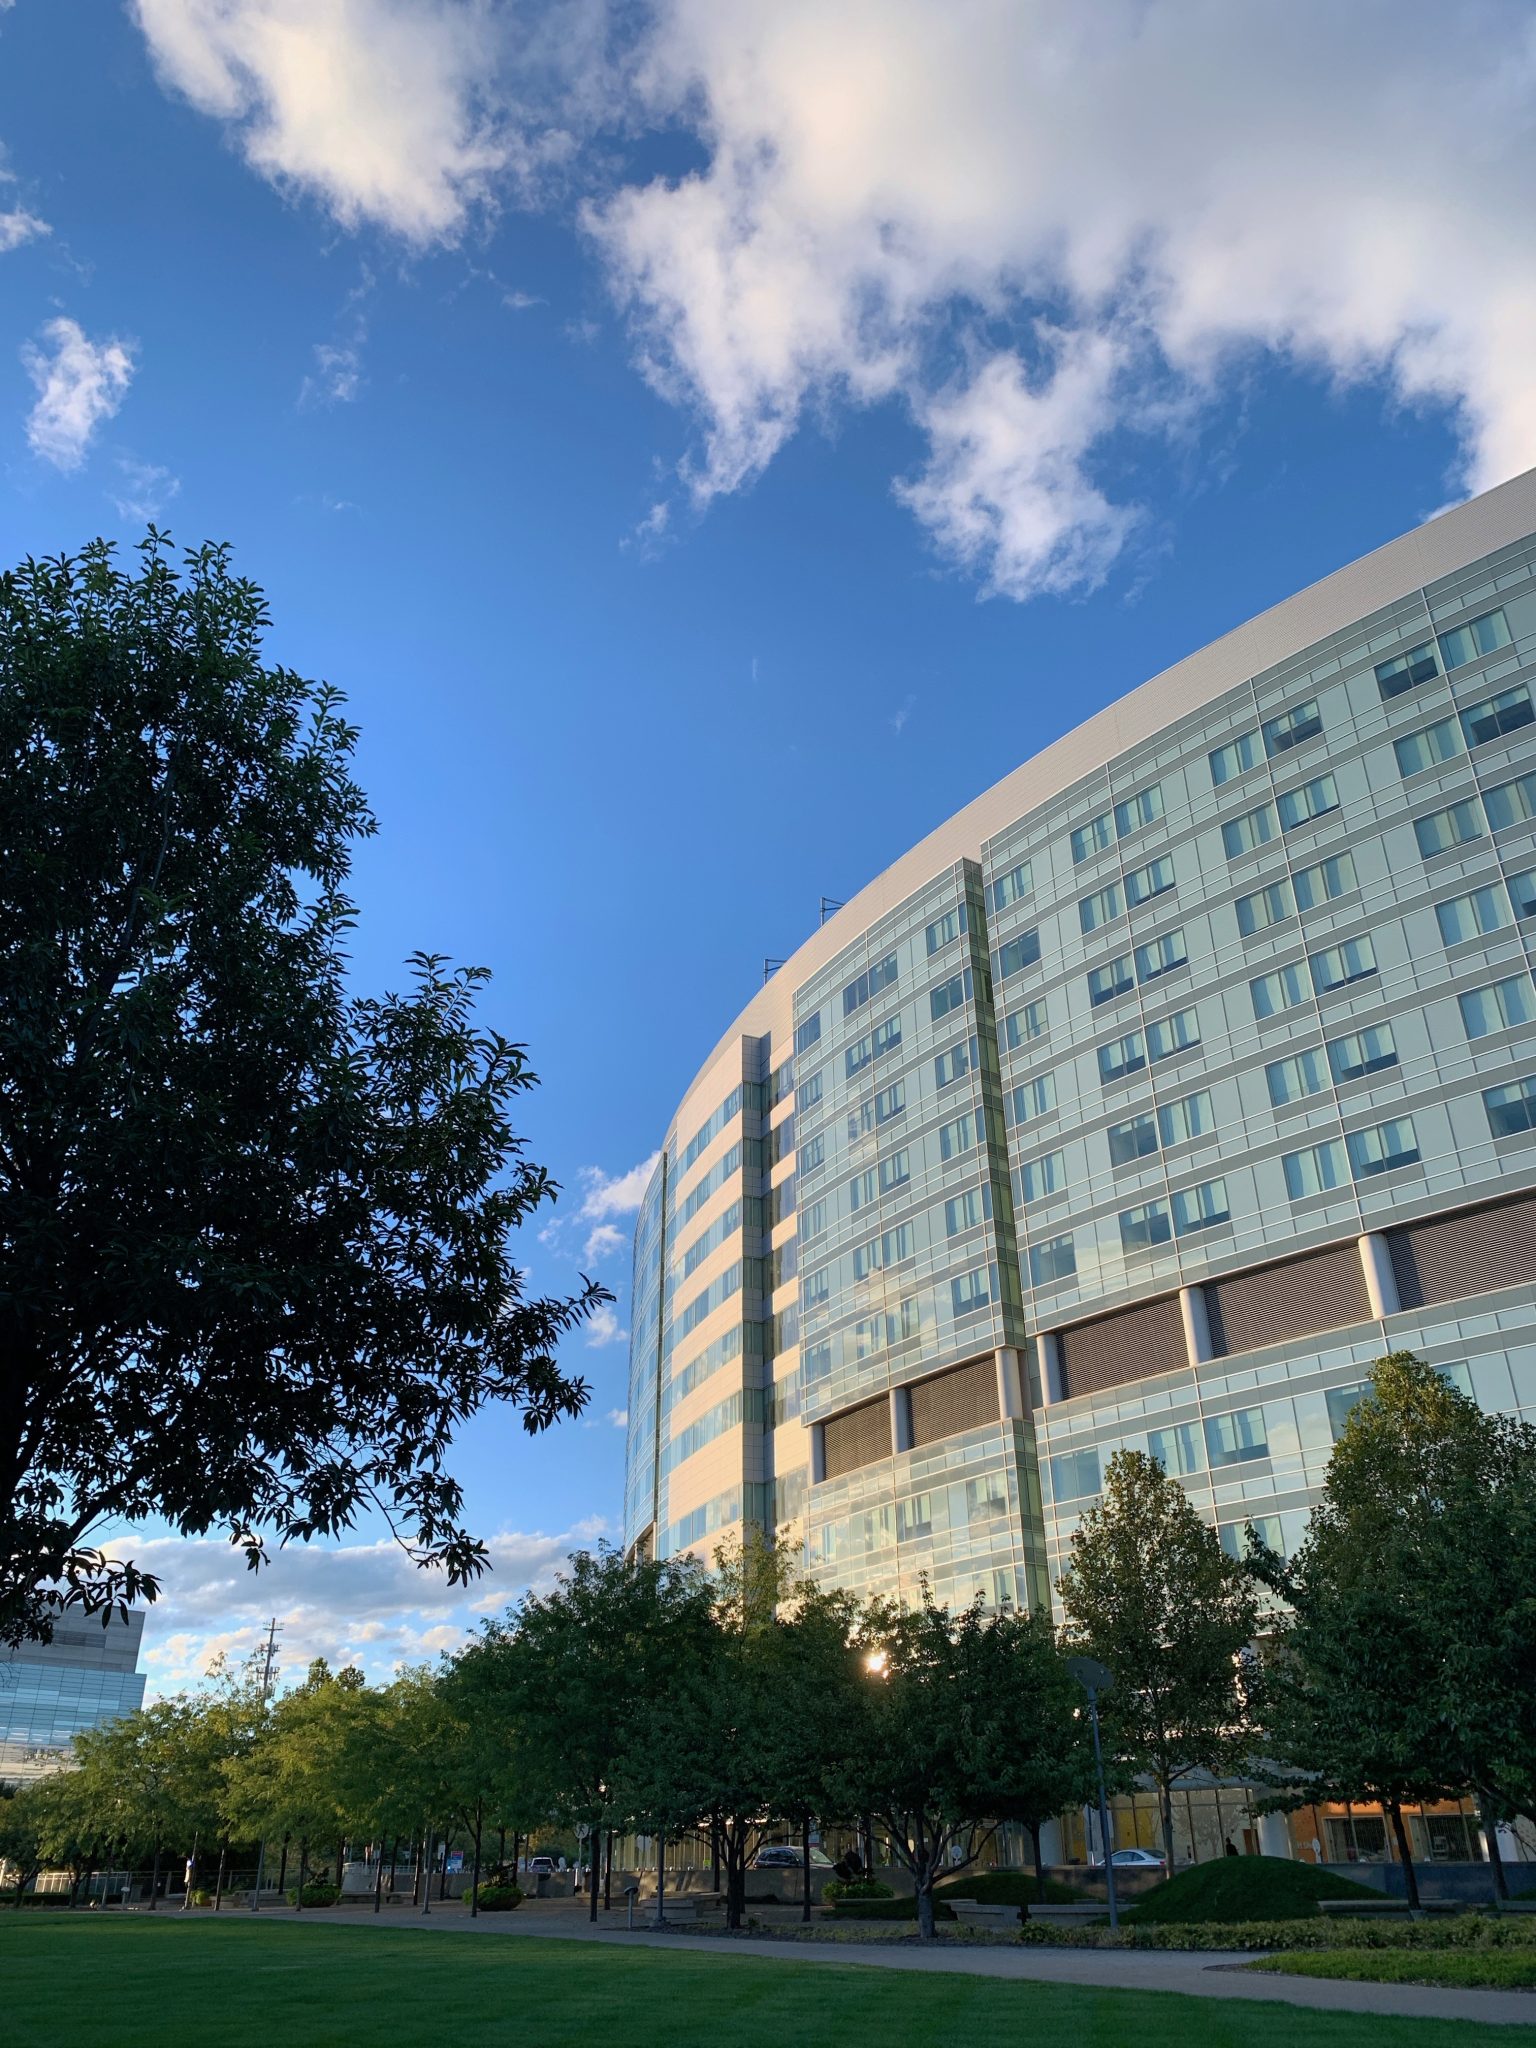 A tall, shiny building with a neatly manicured park with trees in the foreground. Nationwide Children's Hospital, Columbus, Ohio